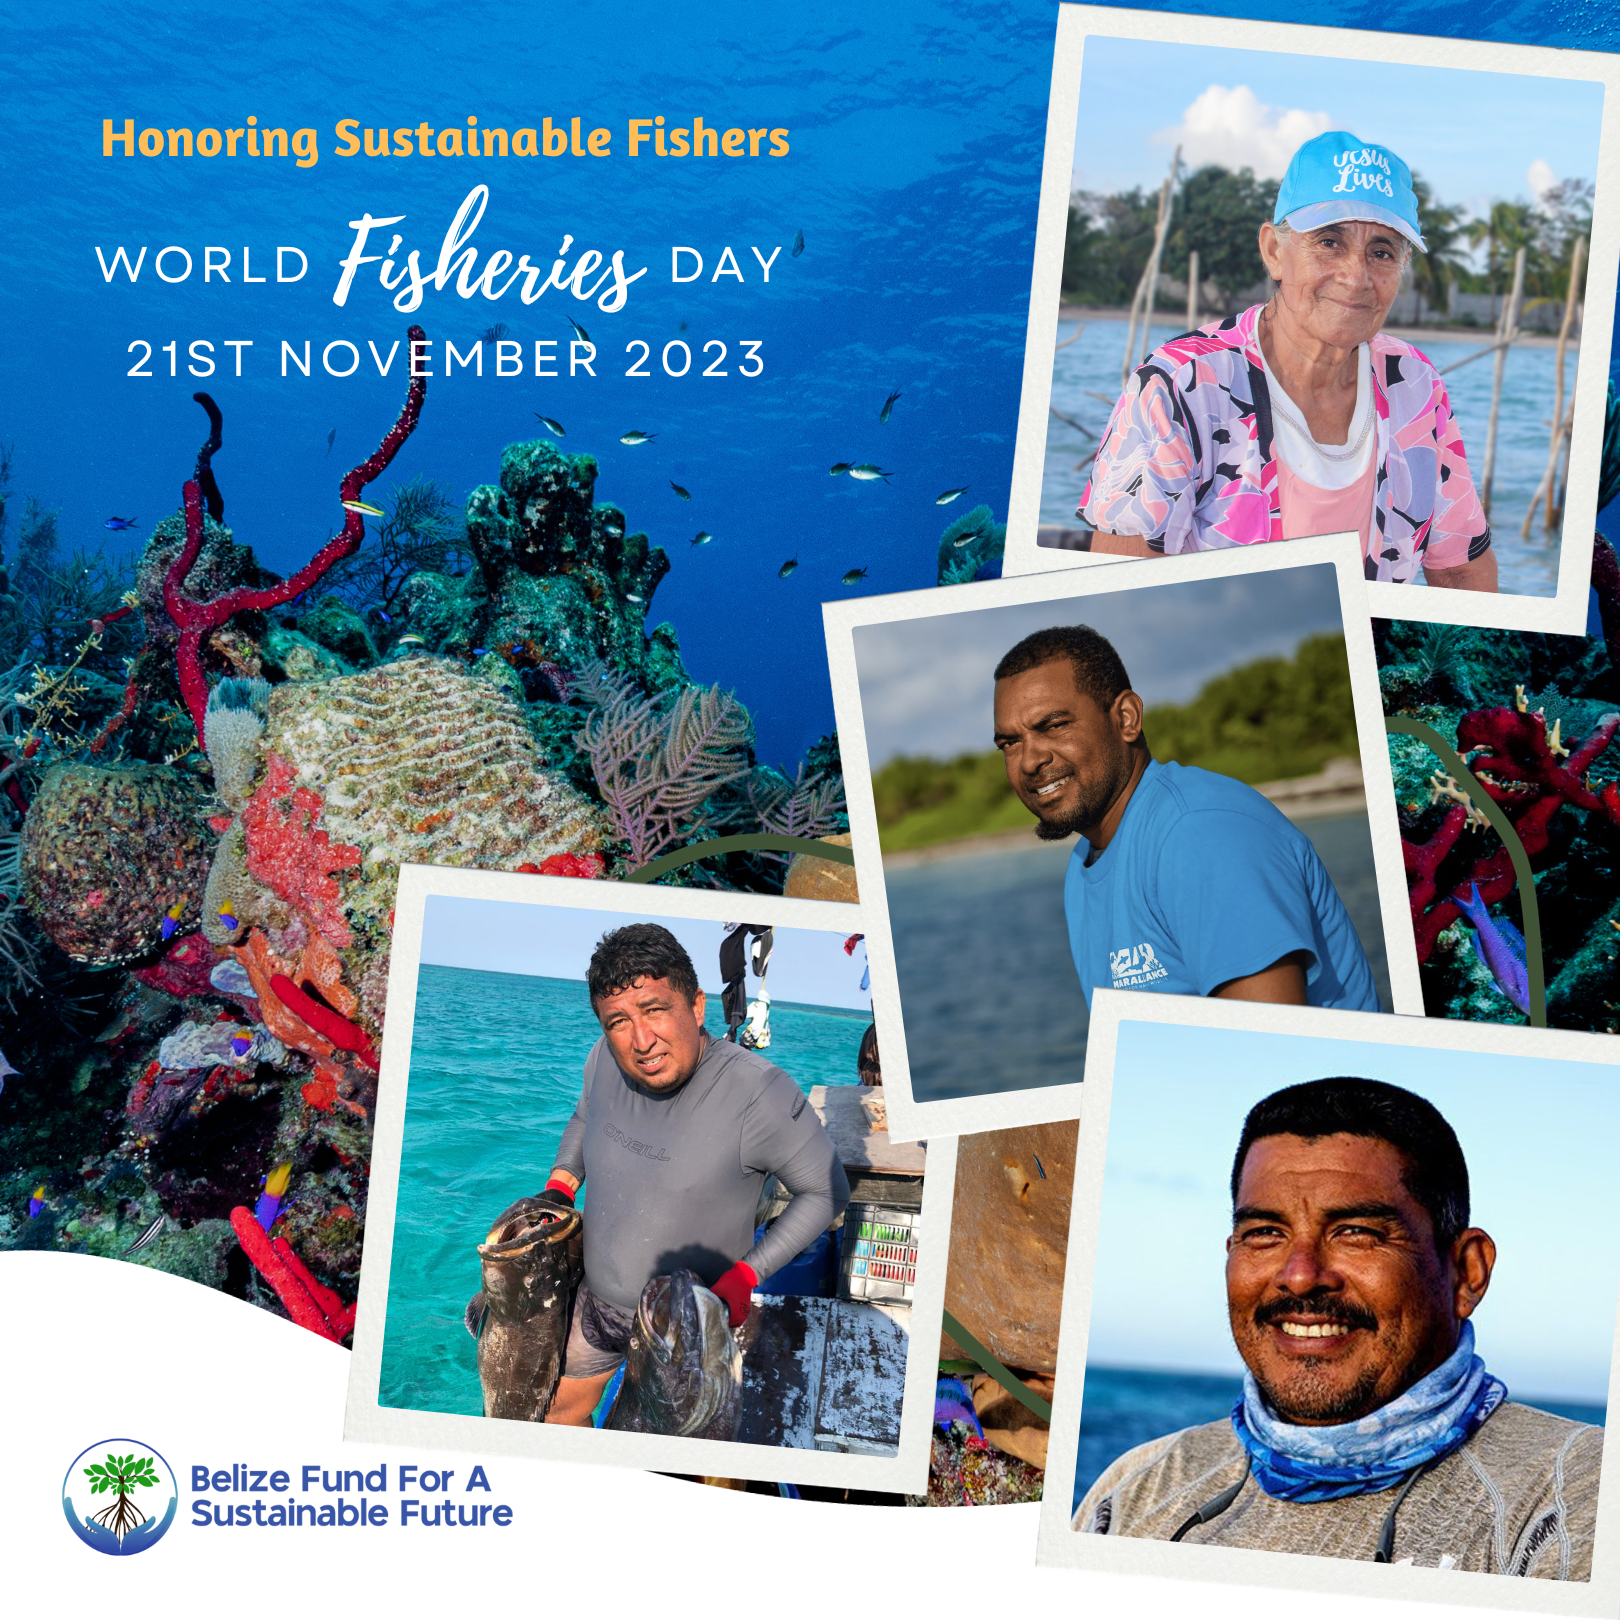 Honoring Sustainable Fishers on World Fisheries Day 🐠🦈🐟 – Nov 21, 2023